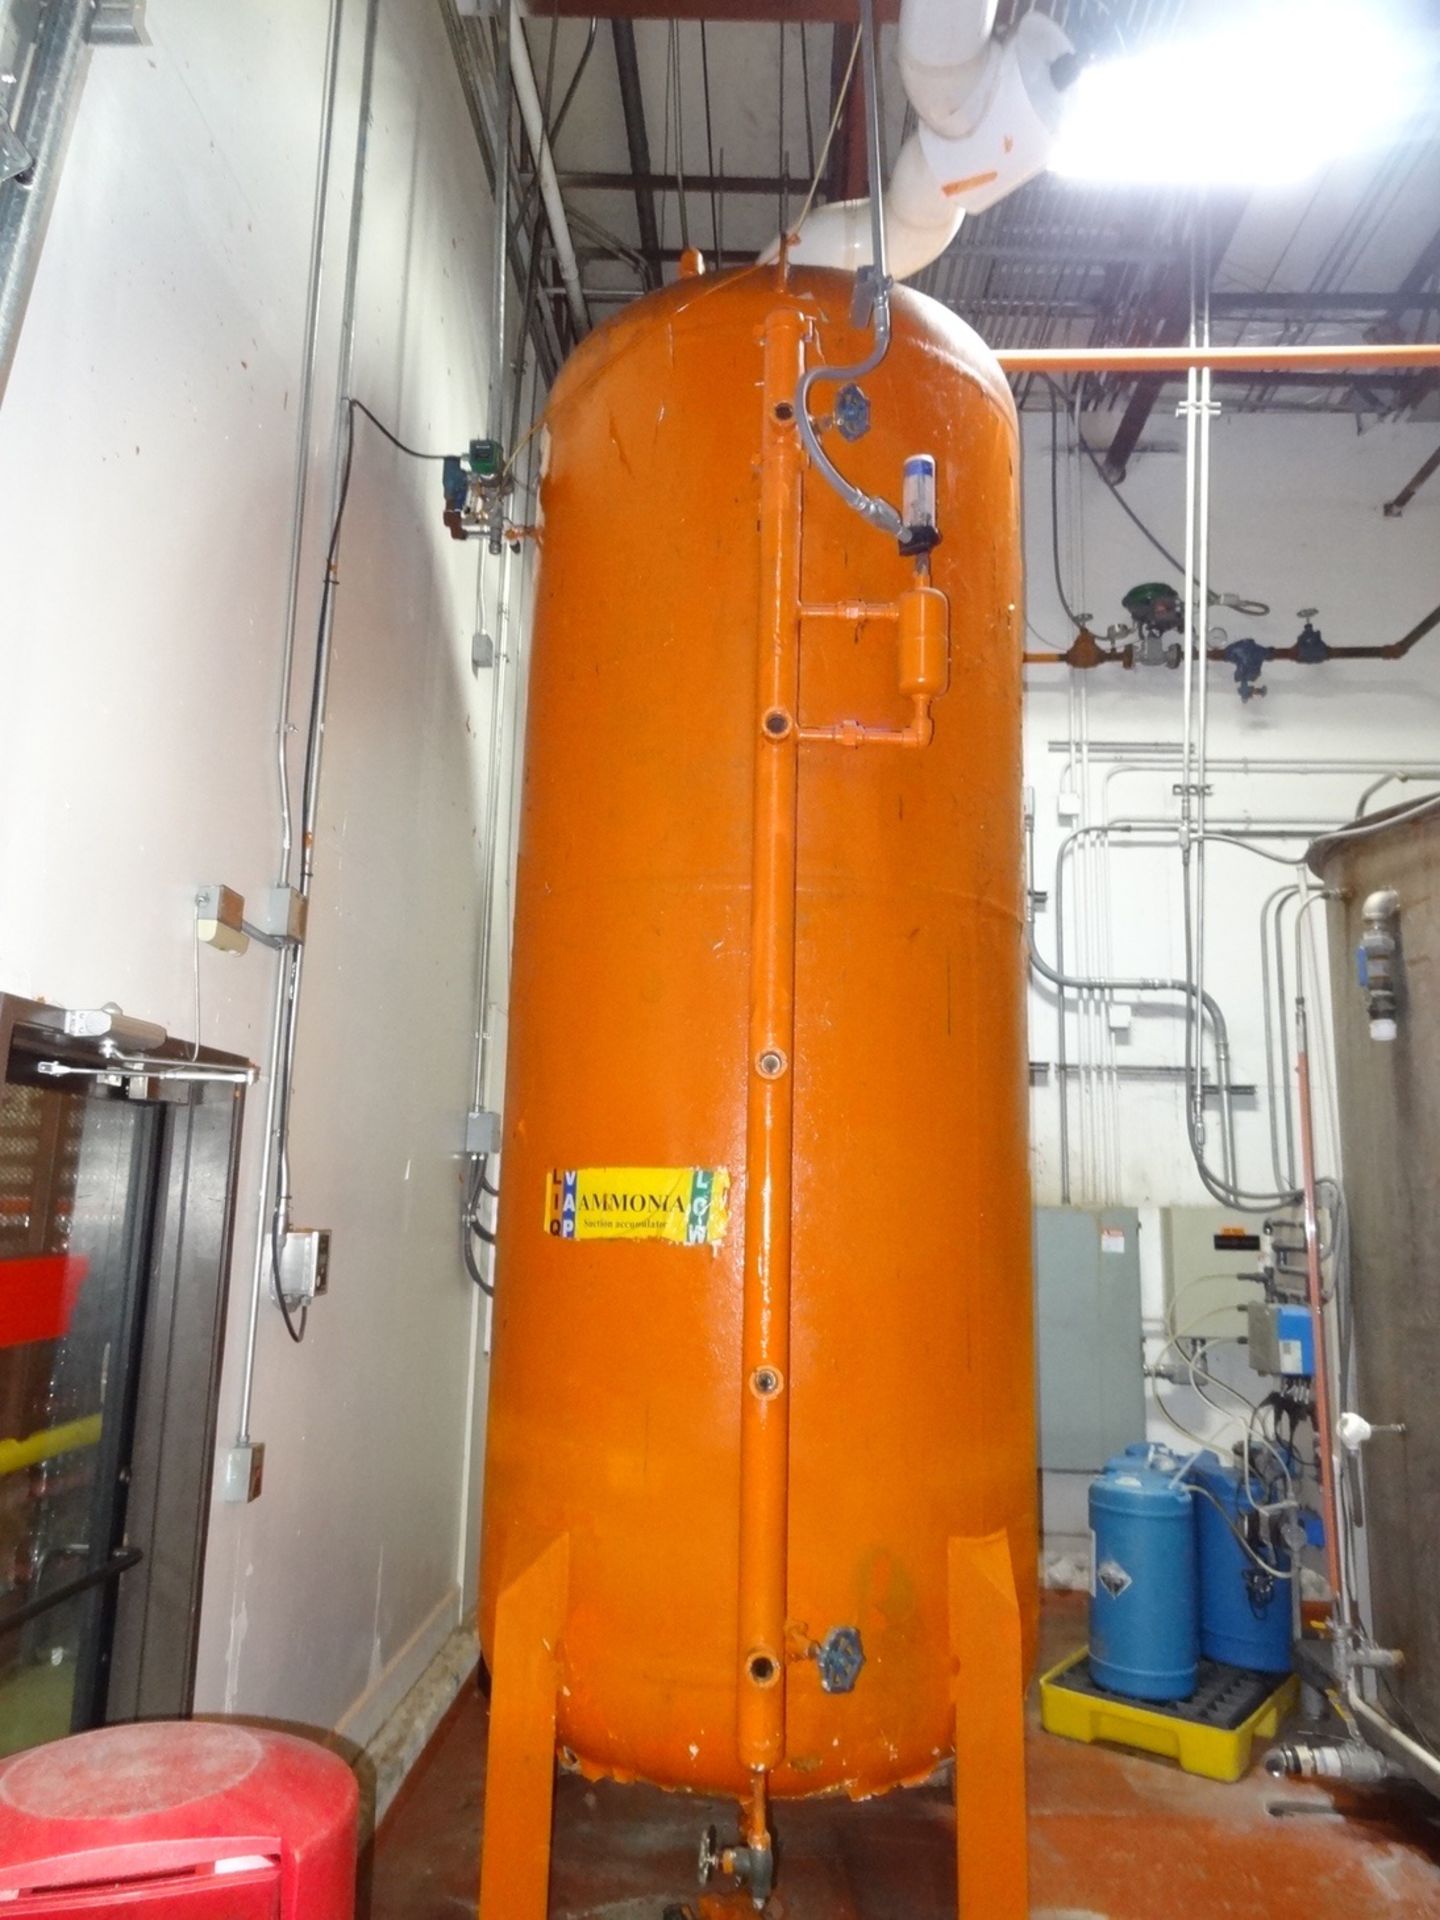 2001 Pressure Products Vertical Ammonia Suction Trap, S/N 01105 | Rigging Fee: $700